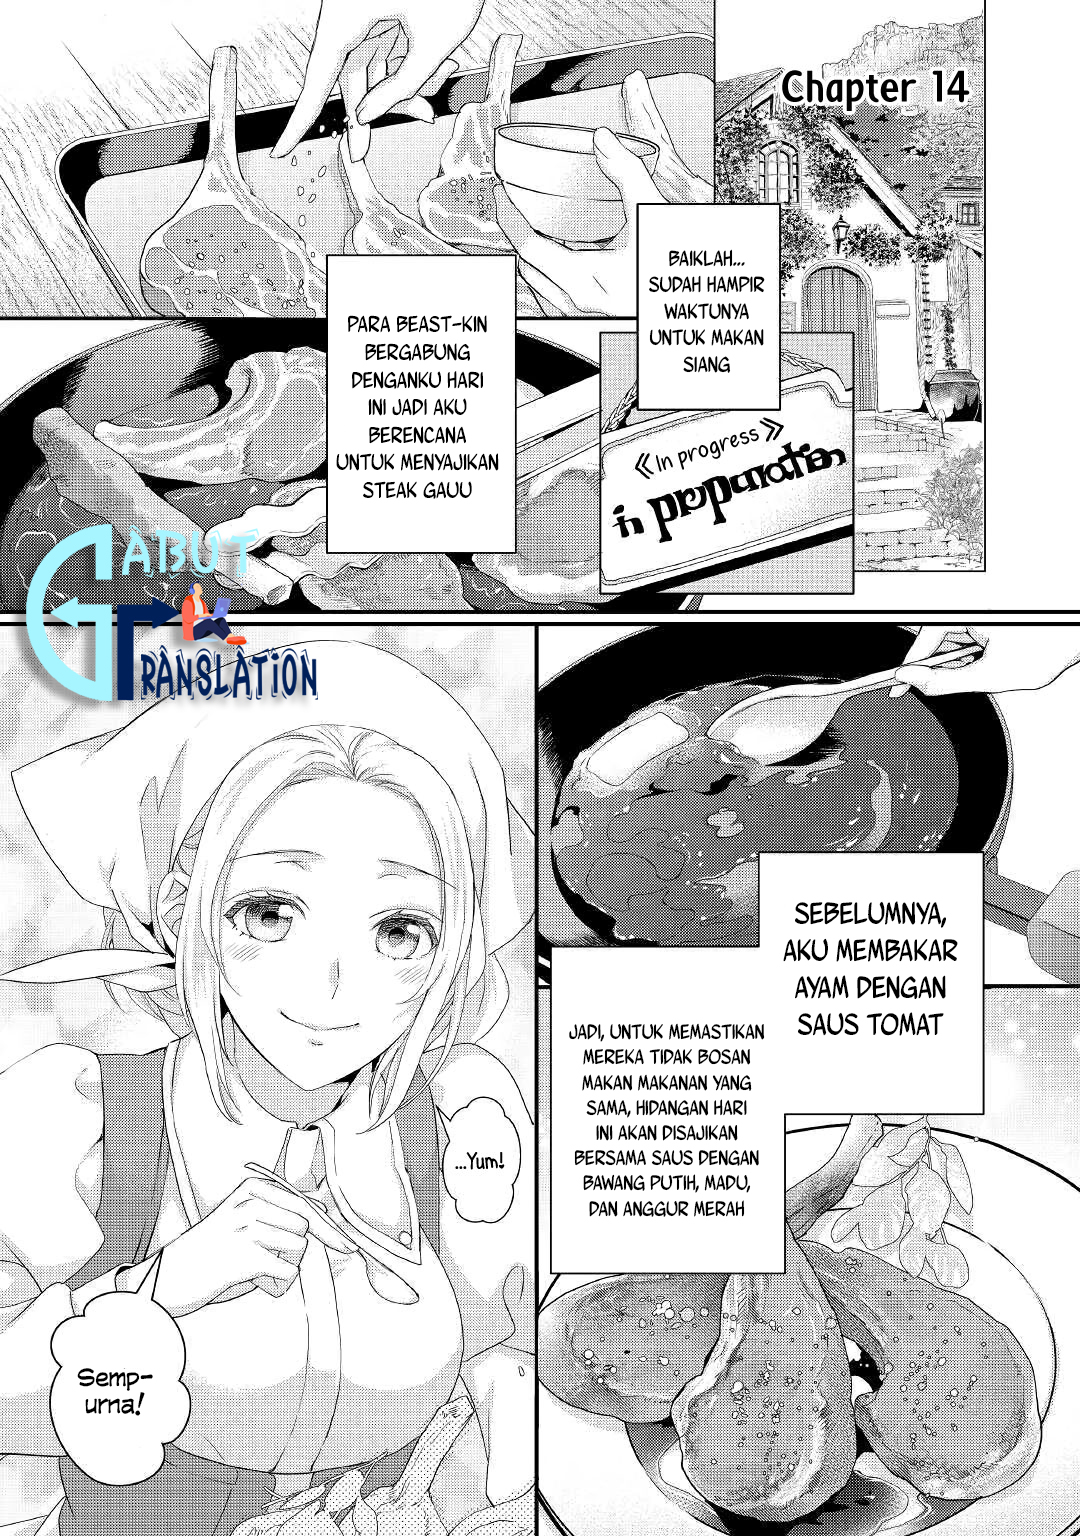 Milady Just Wants to Relax Chapter 14